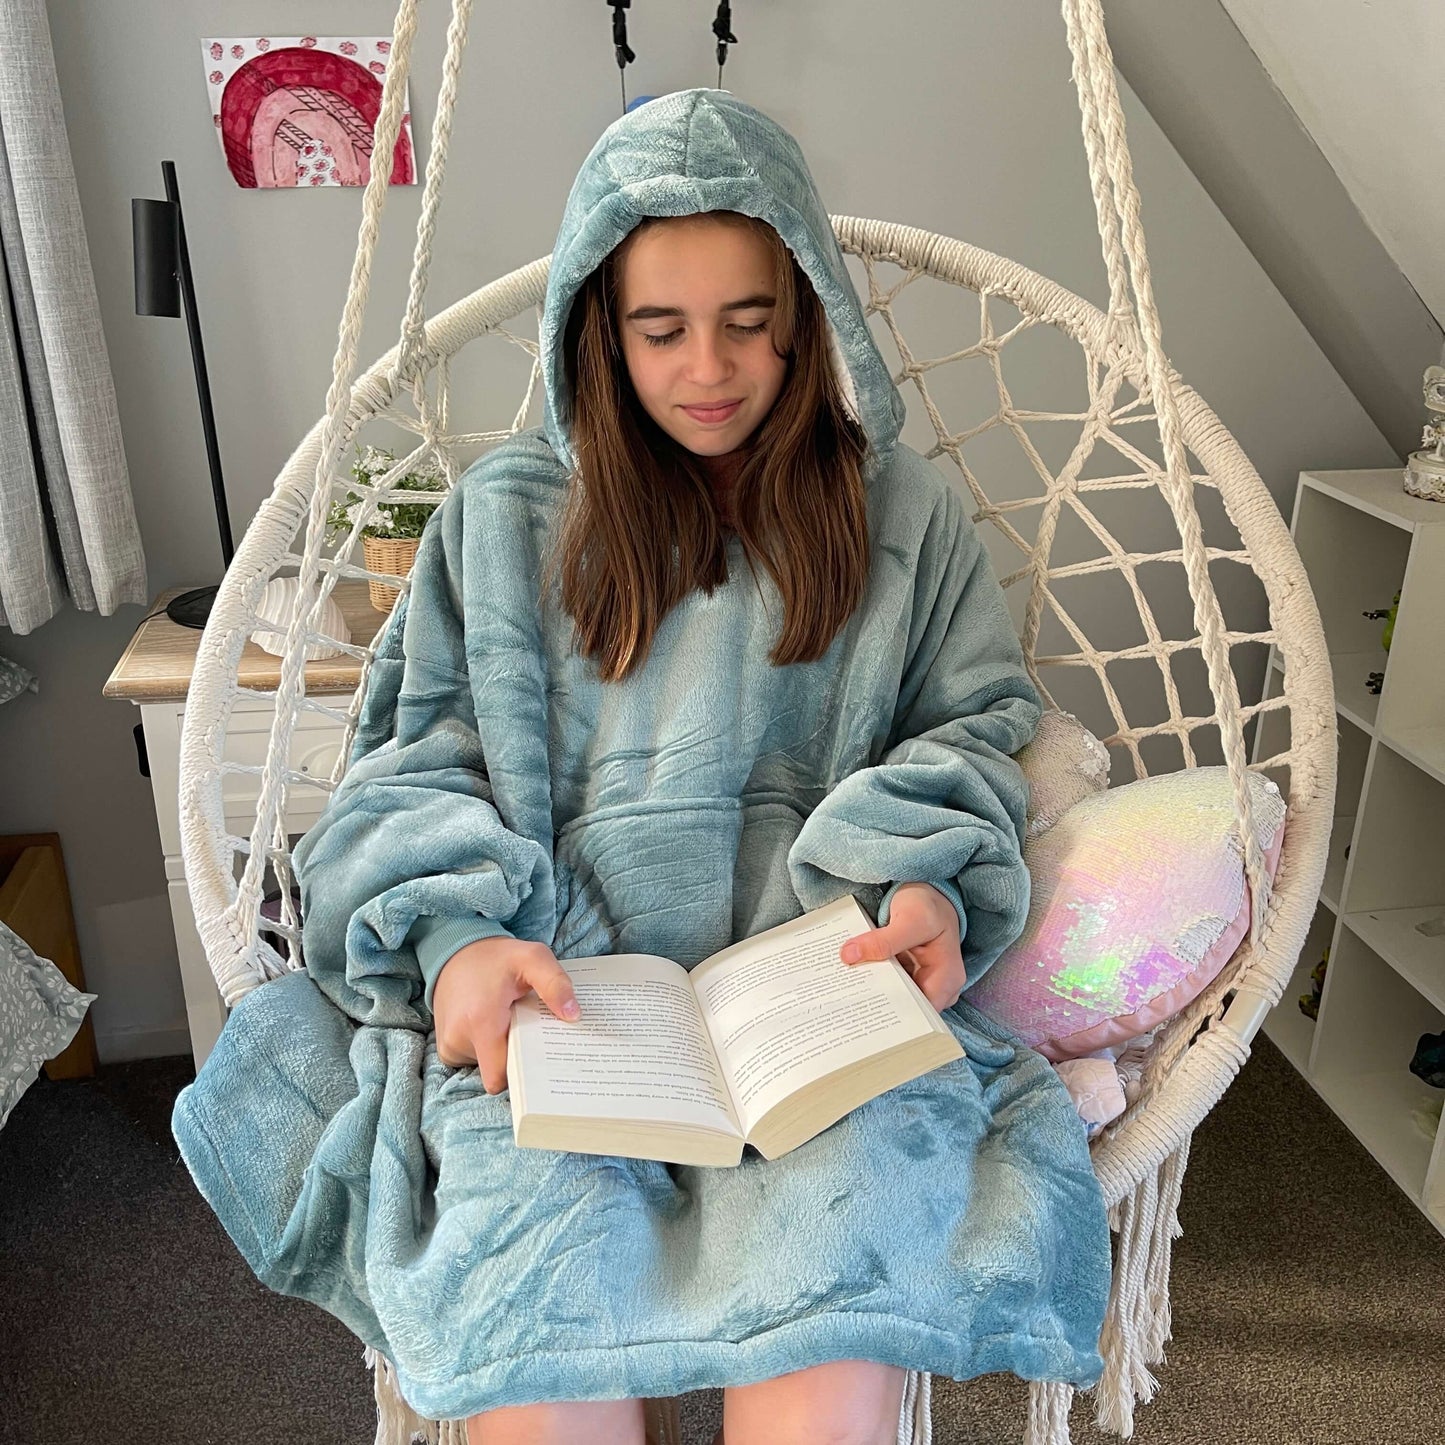 Girl sitting in a swing chair reading a book wearing an oversized blue hoodie.